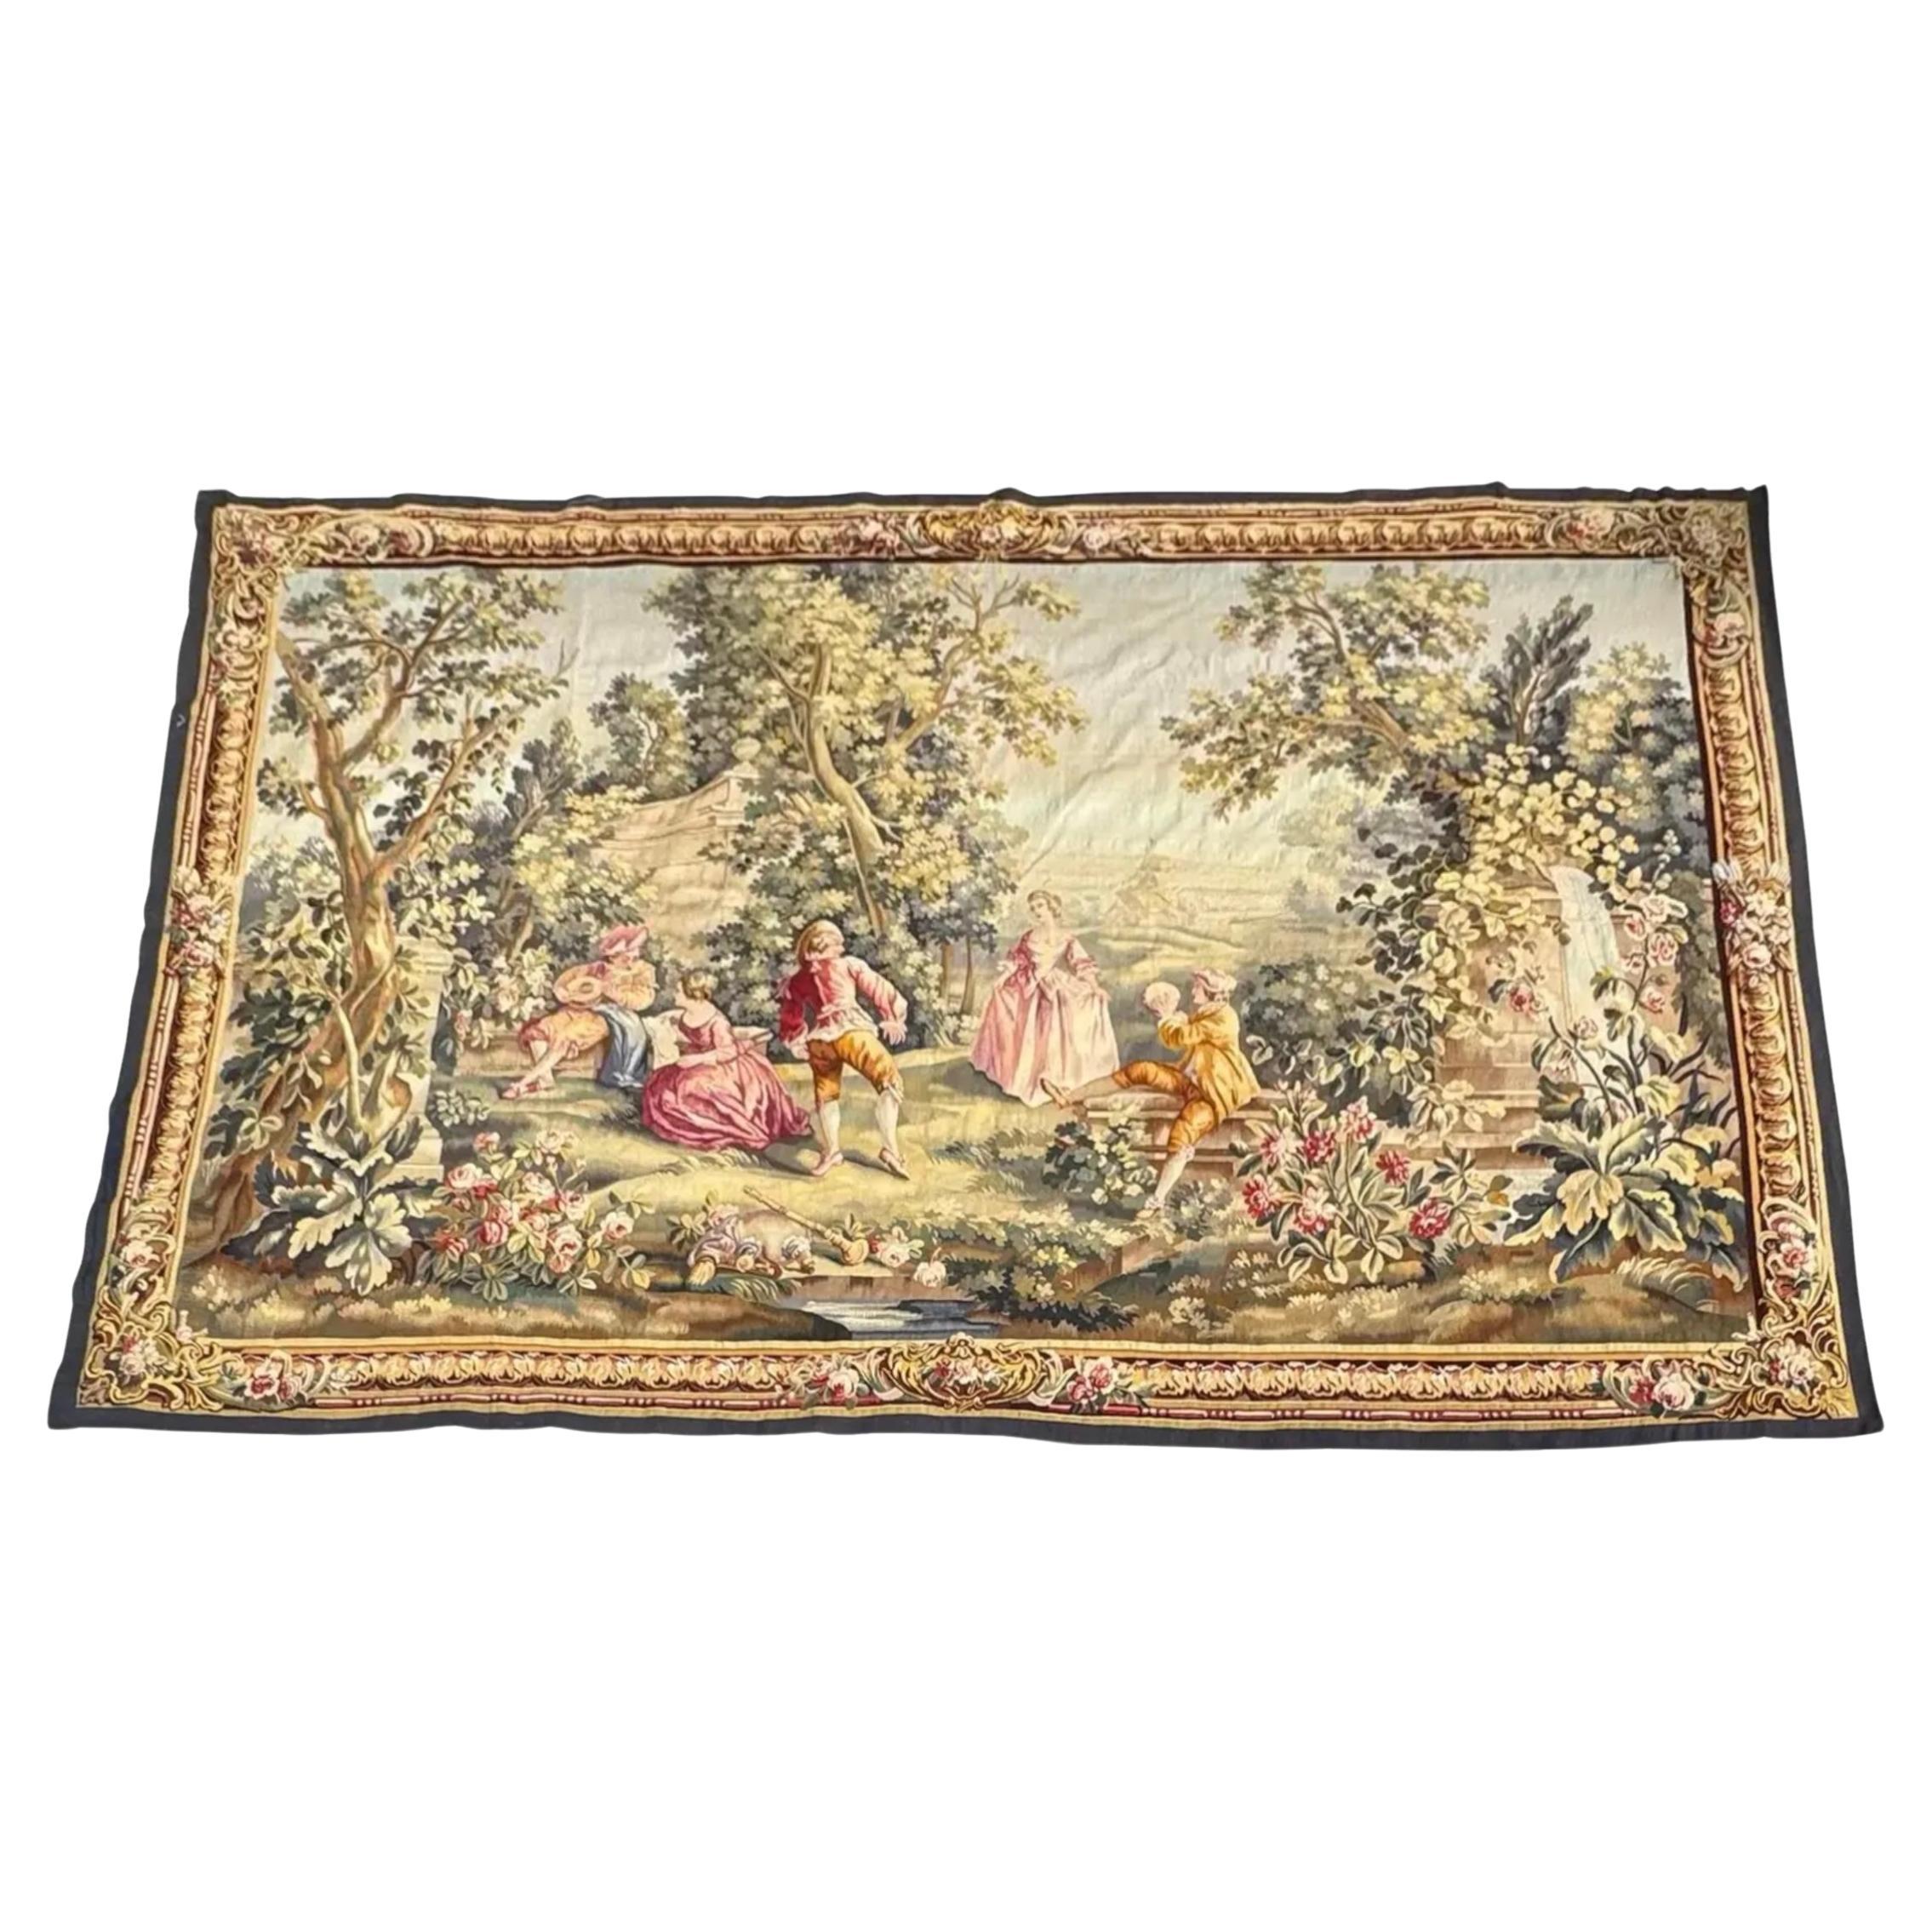 Huge Antique 19th Century French Aubusson Tapestry 135” For Sale